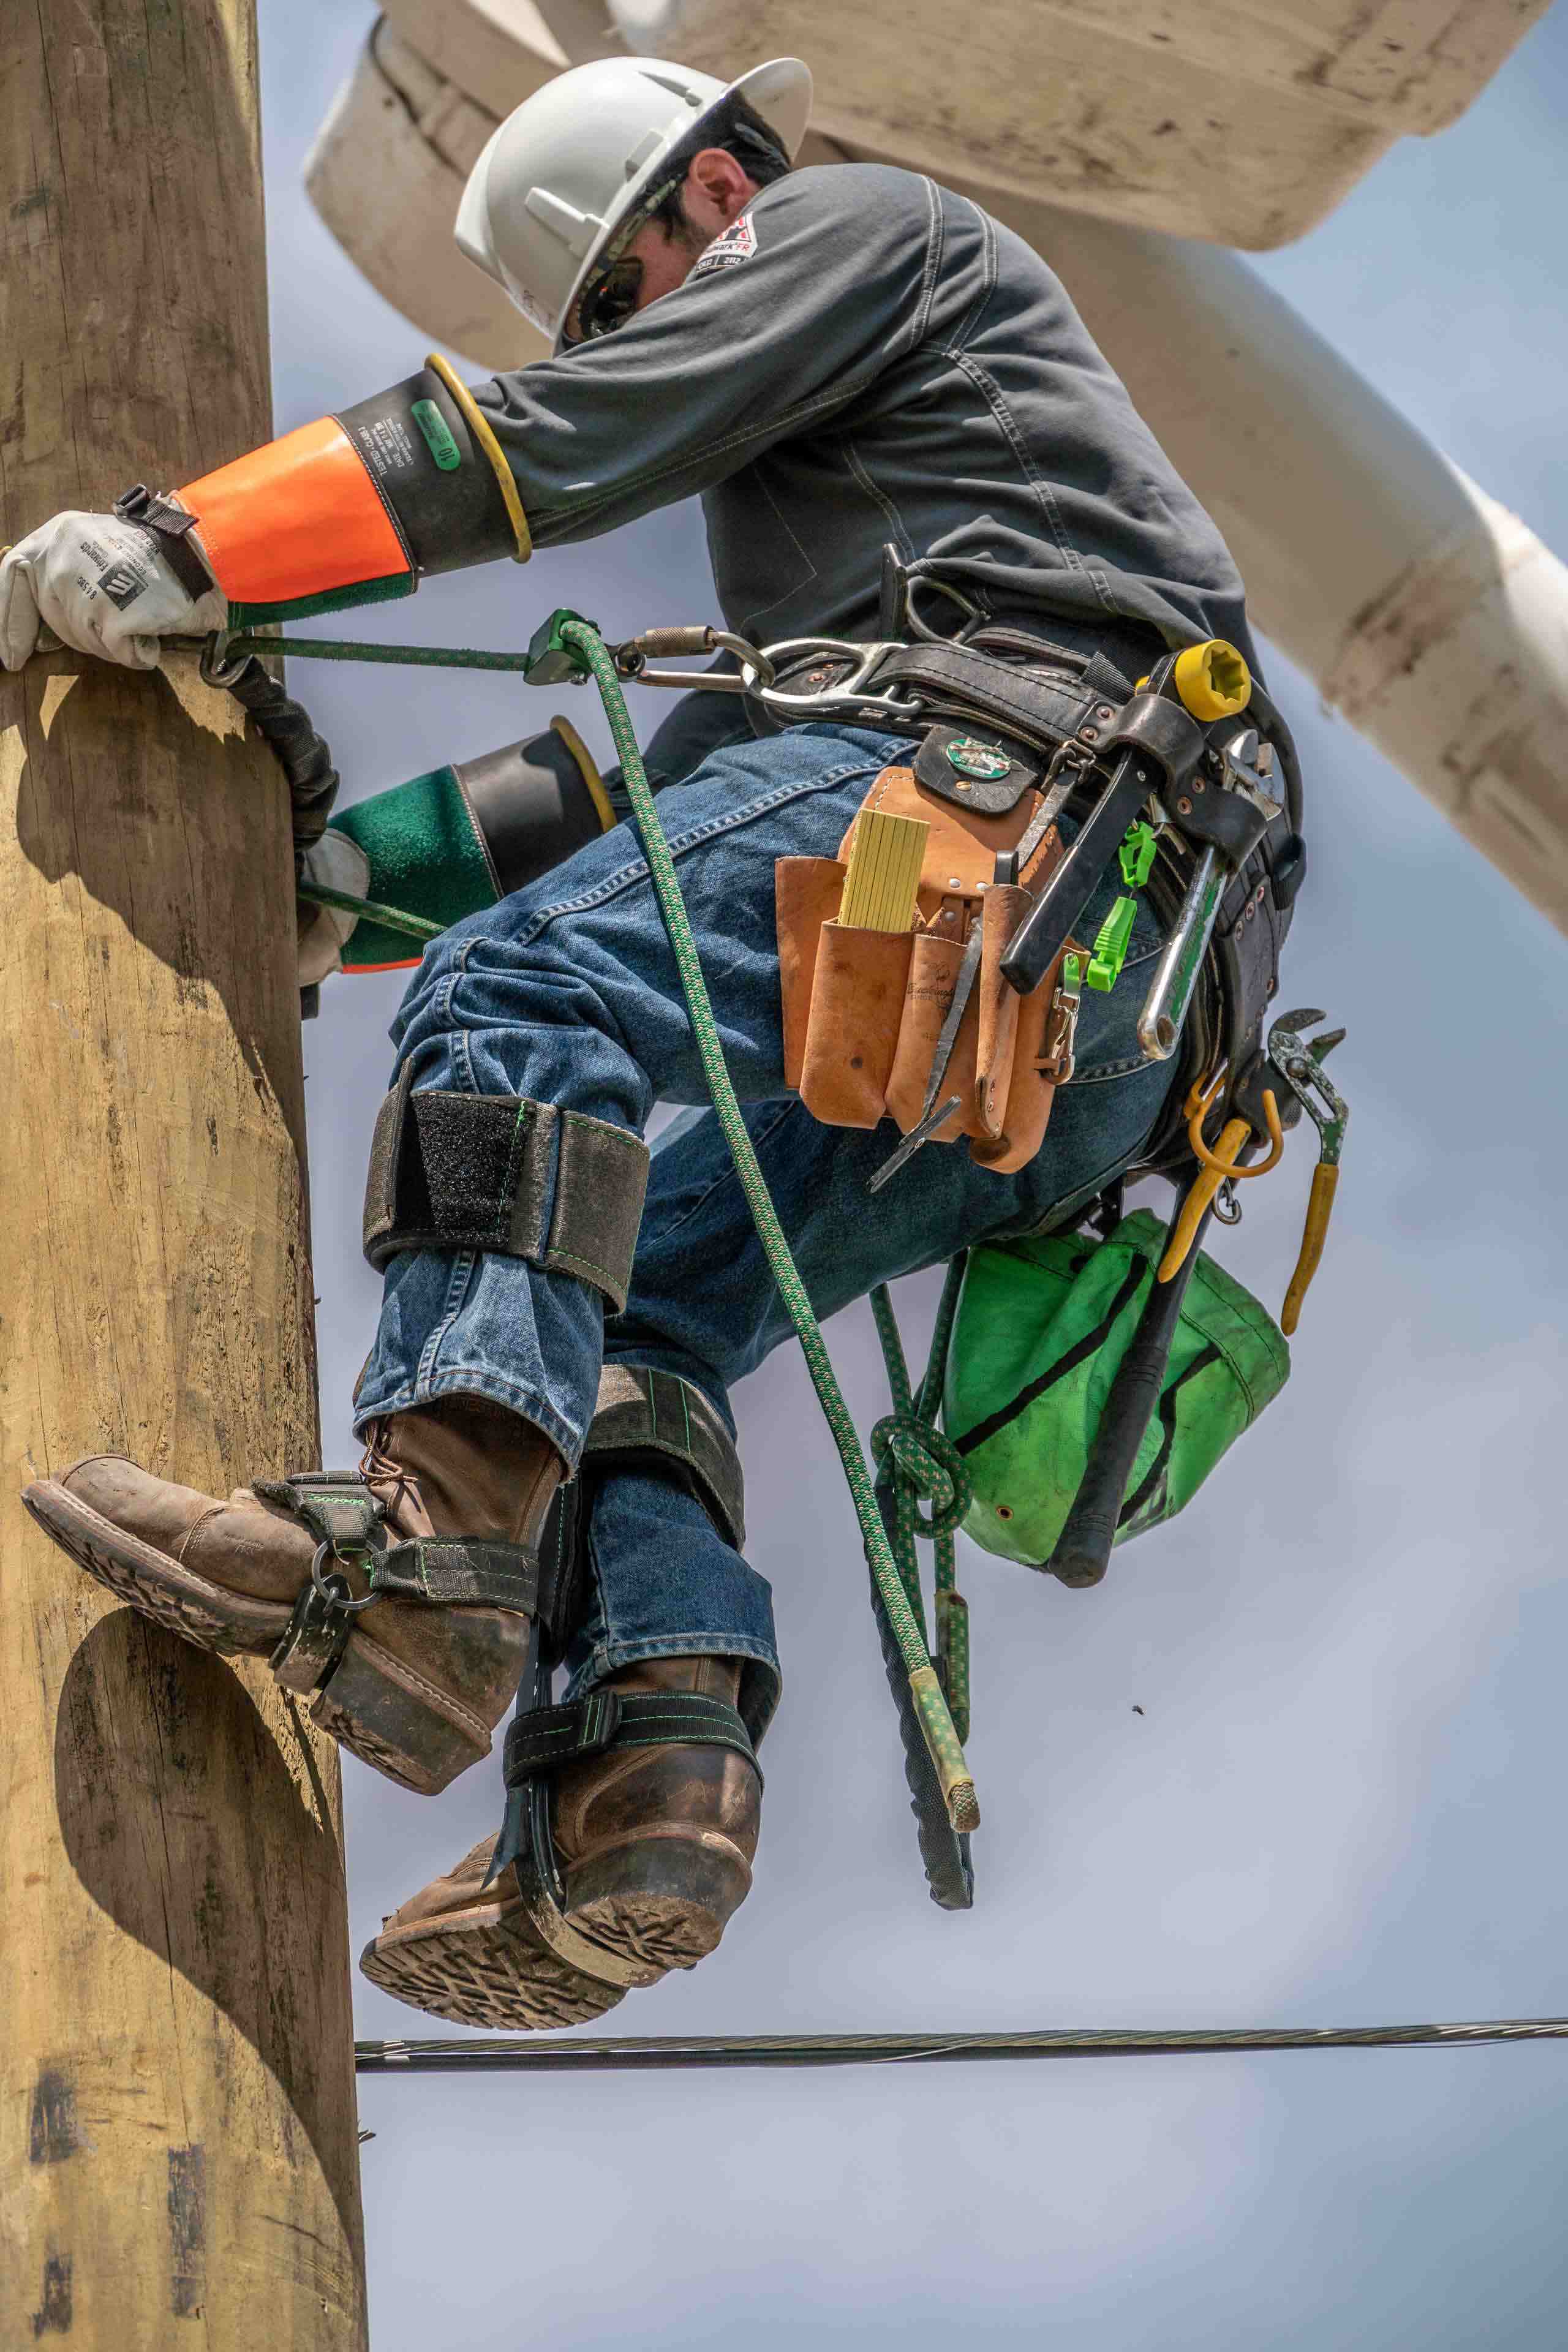 Ascending Heights: Oncor Lineman Climbs Electrical Pole to Restore Electricity